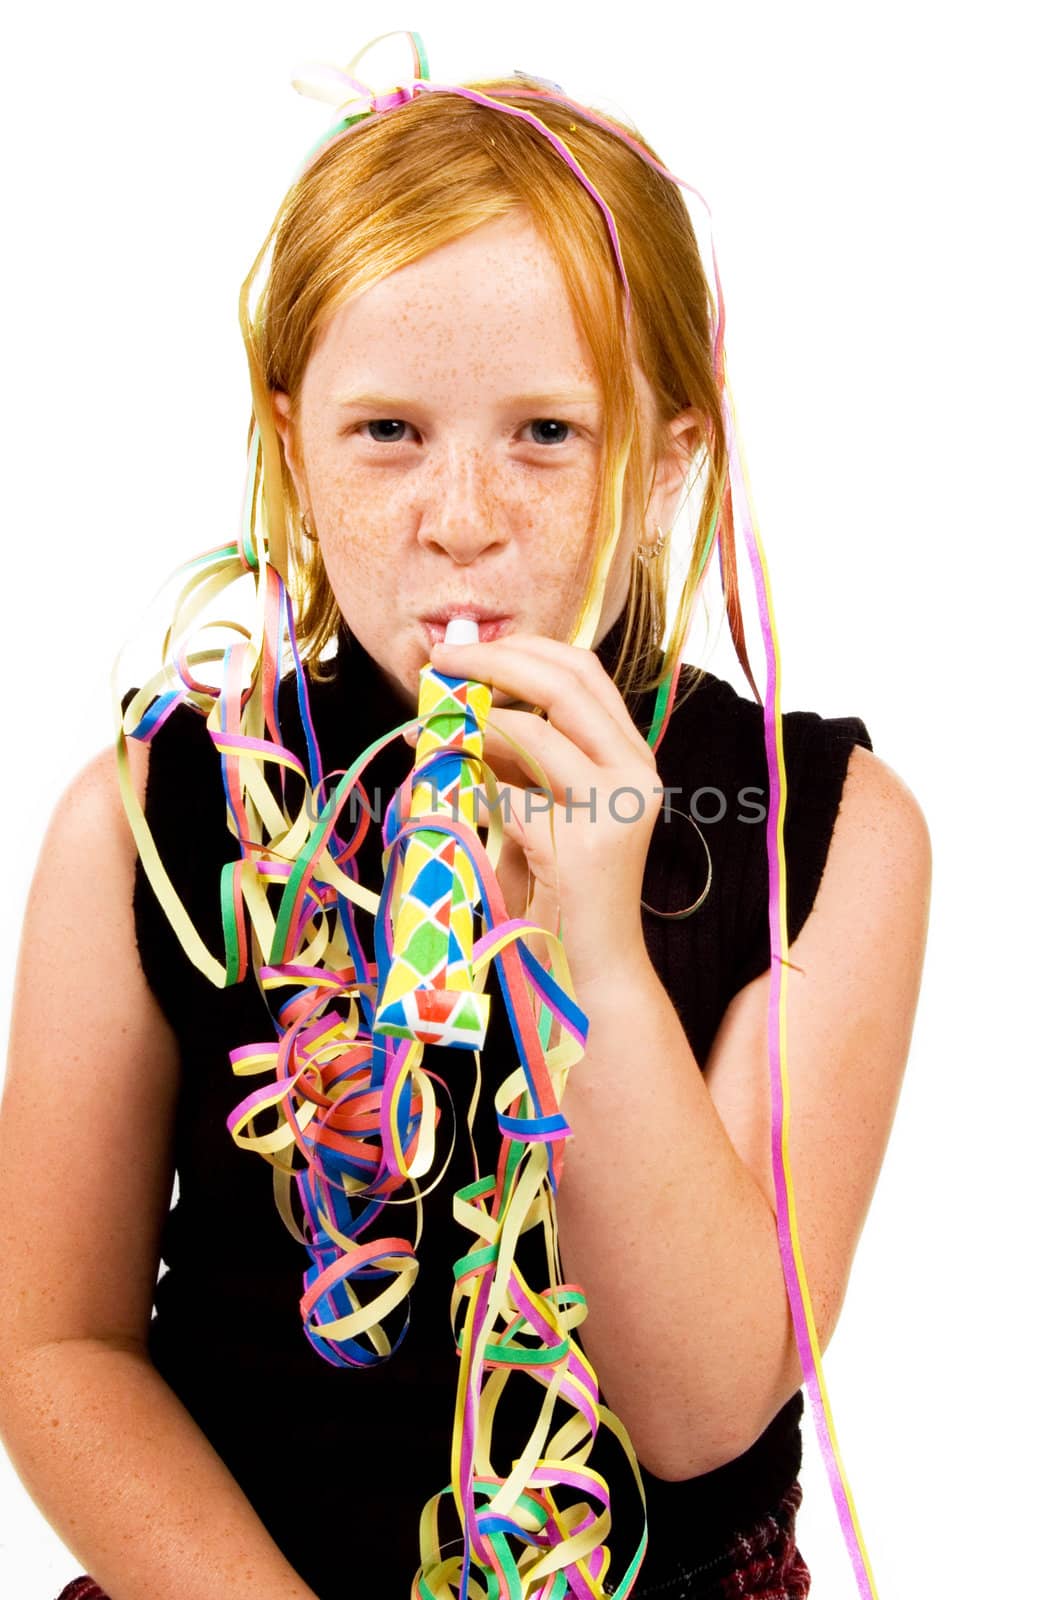 young girl is celebrating her birthday on white